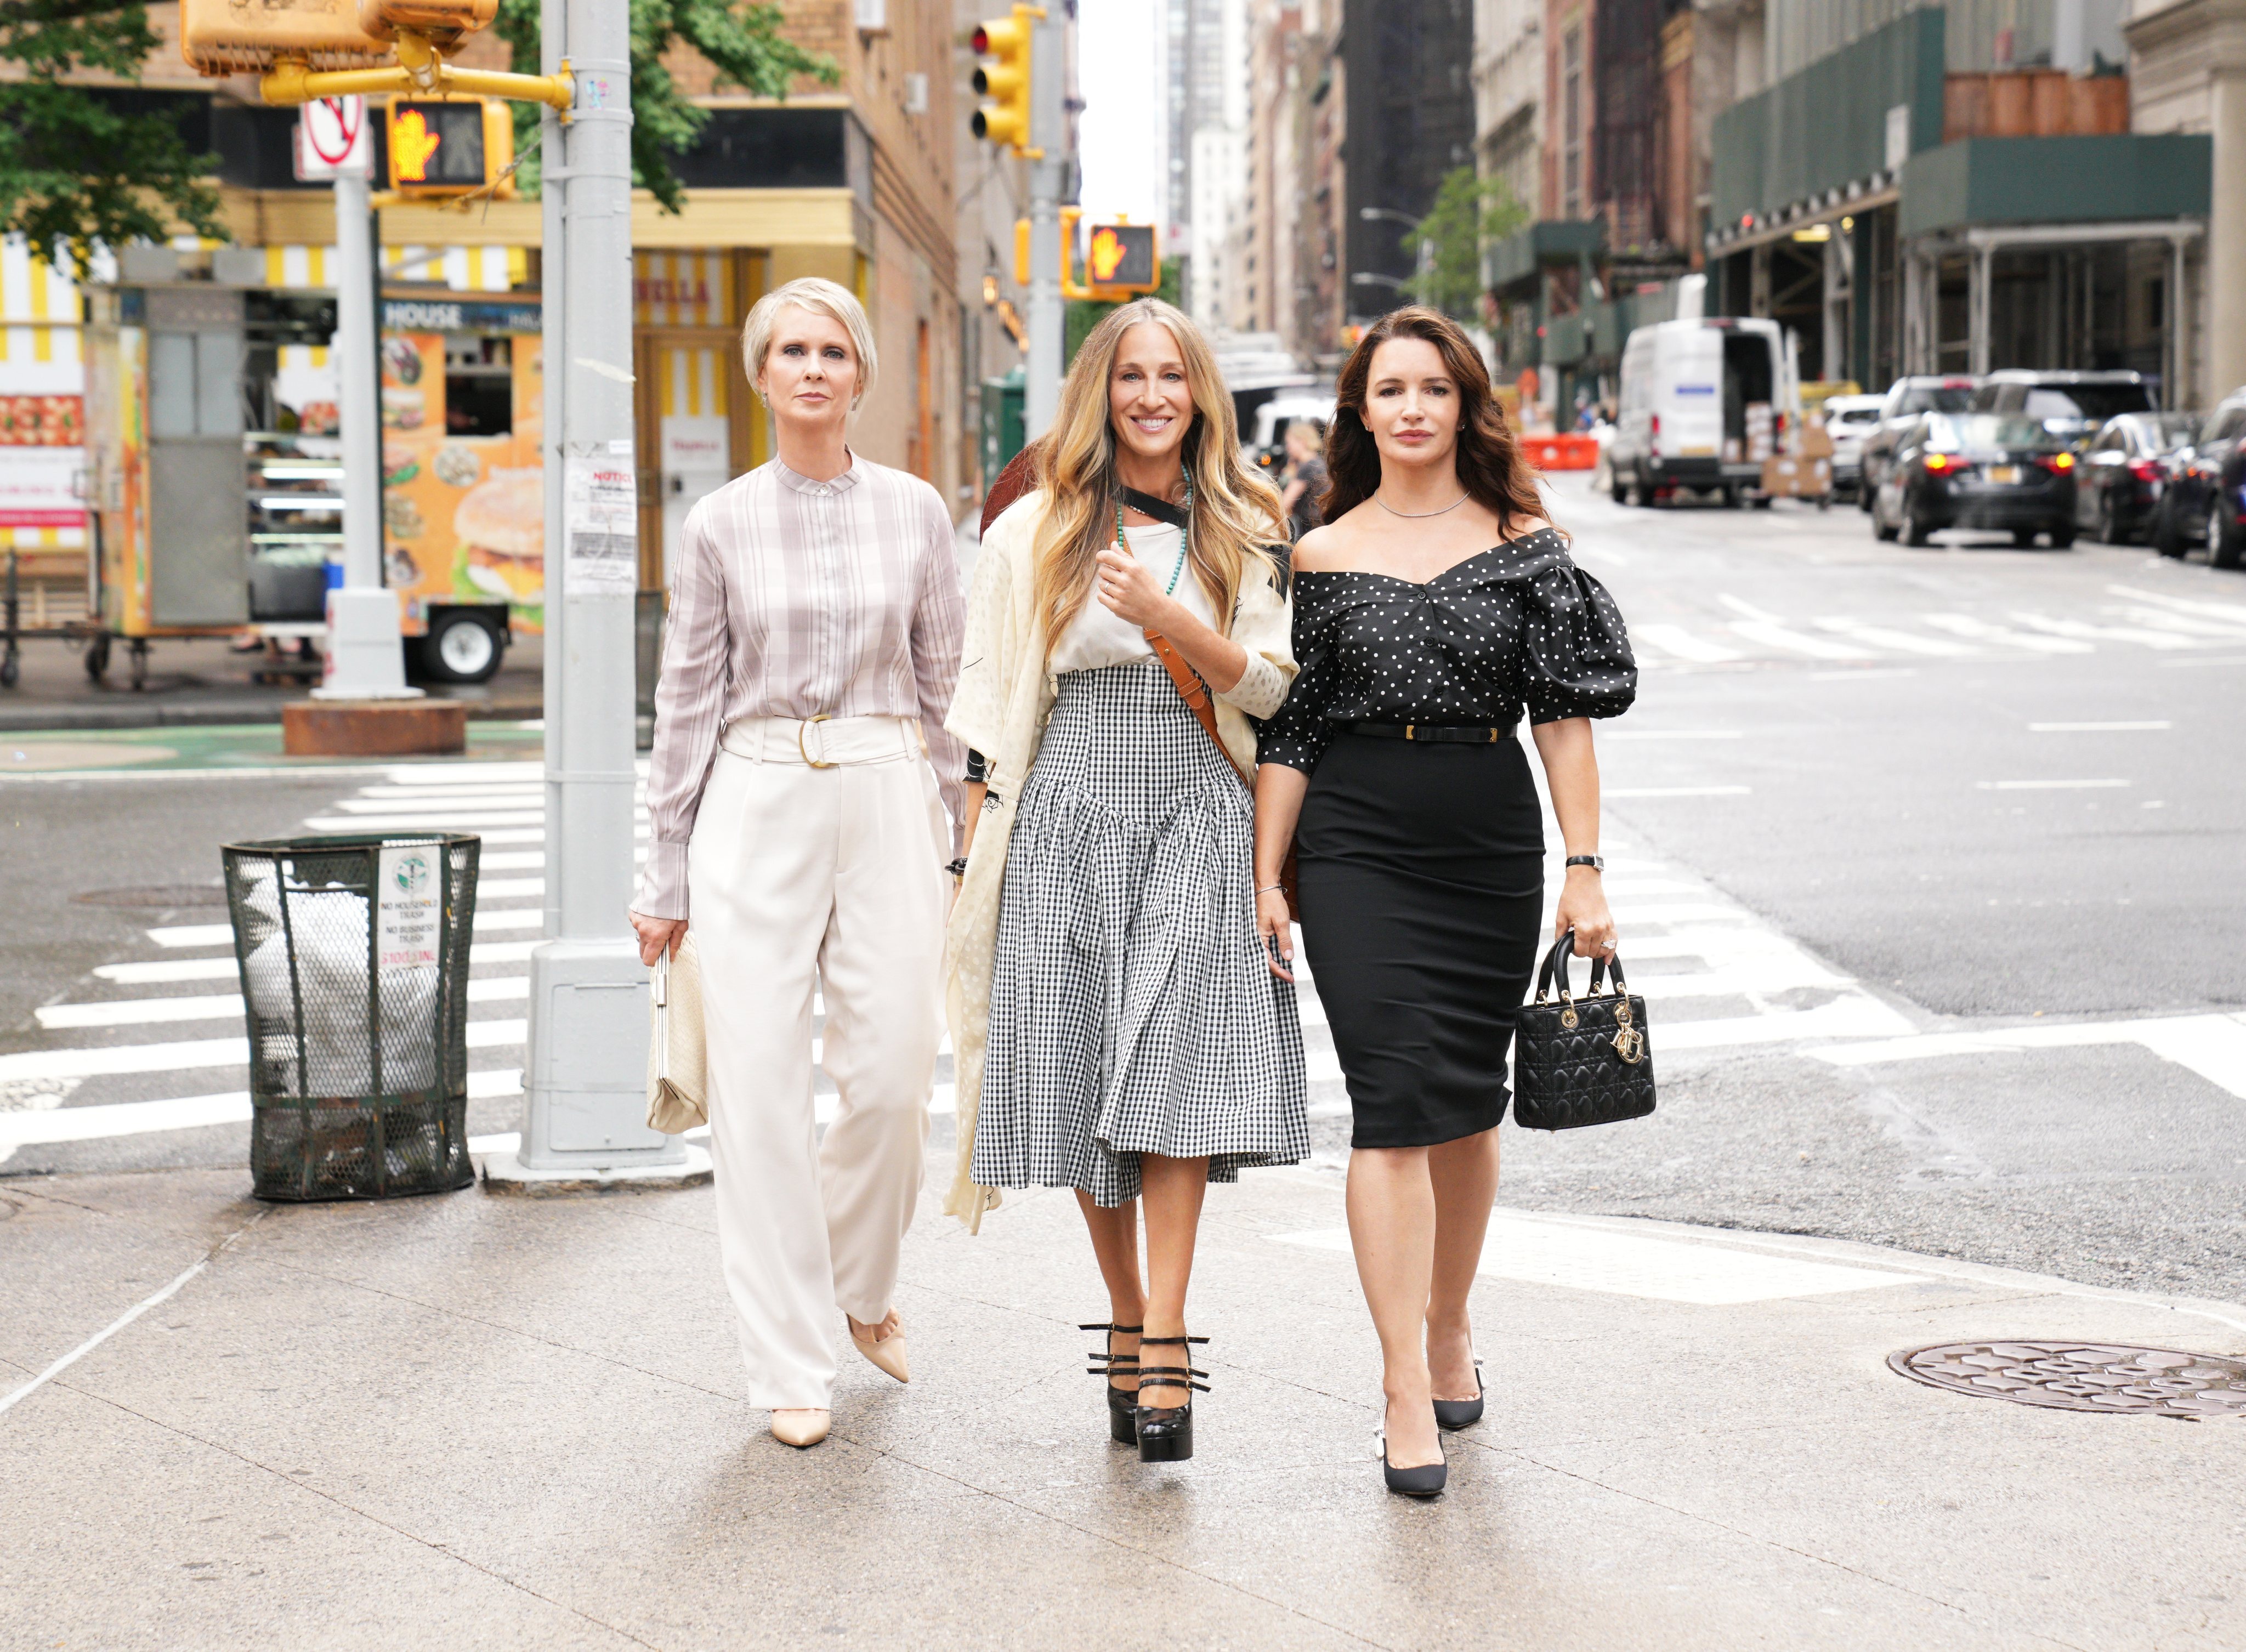 From left, Cynthia Nixon, Sarah Jessica Parker and Kristin Davis as Miranda, Carrie and Charlotte: three of the lead characters from Sex and the City return in 2021’s sequel series on HBO Max, And Just Like That, continuing to flaunt a designer wardrobe. Photo: HBO GO